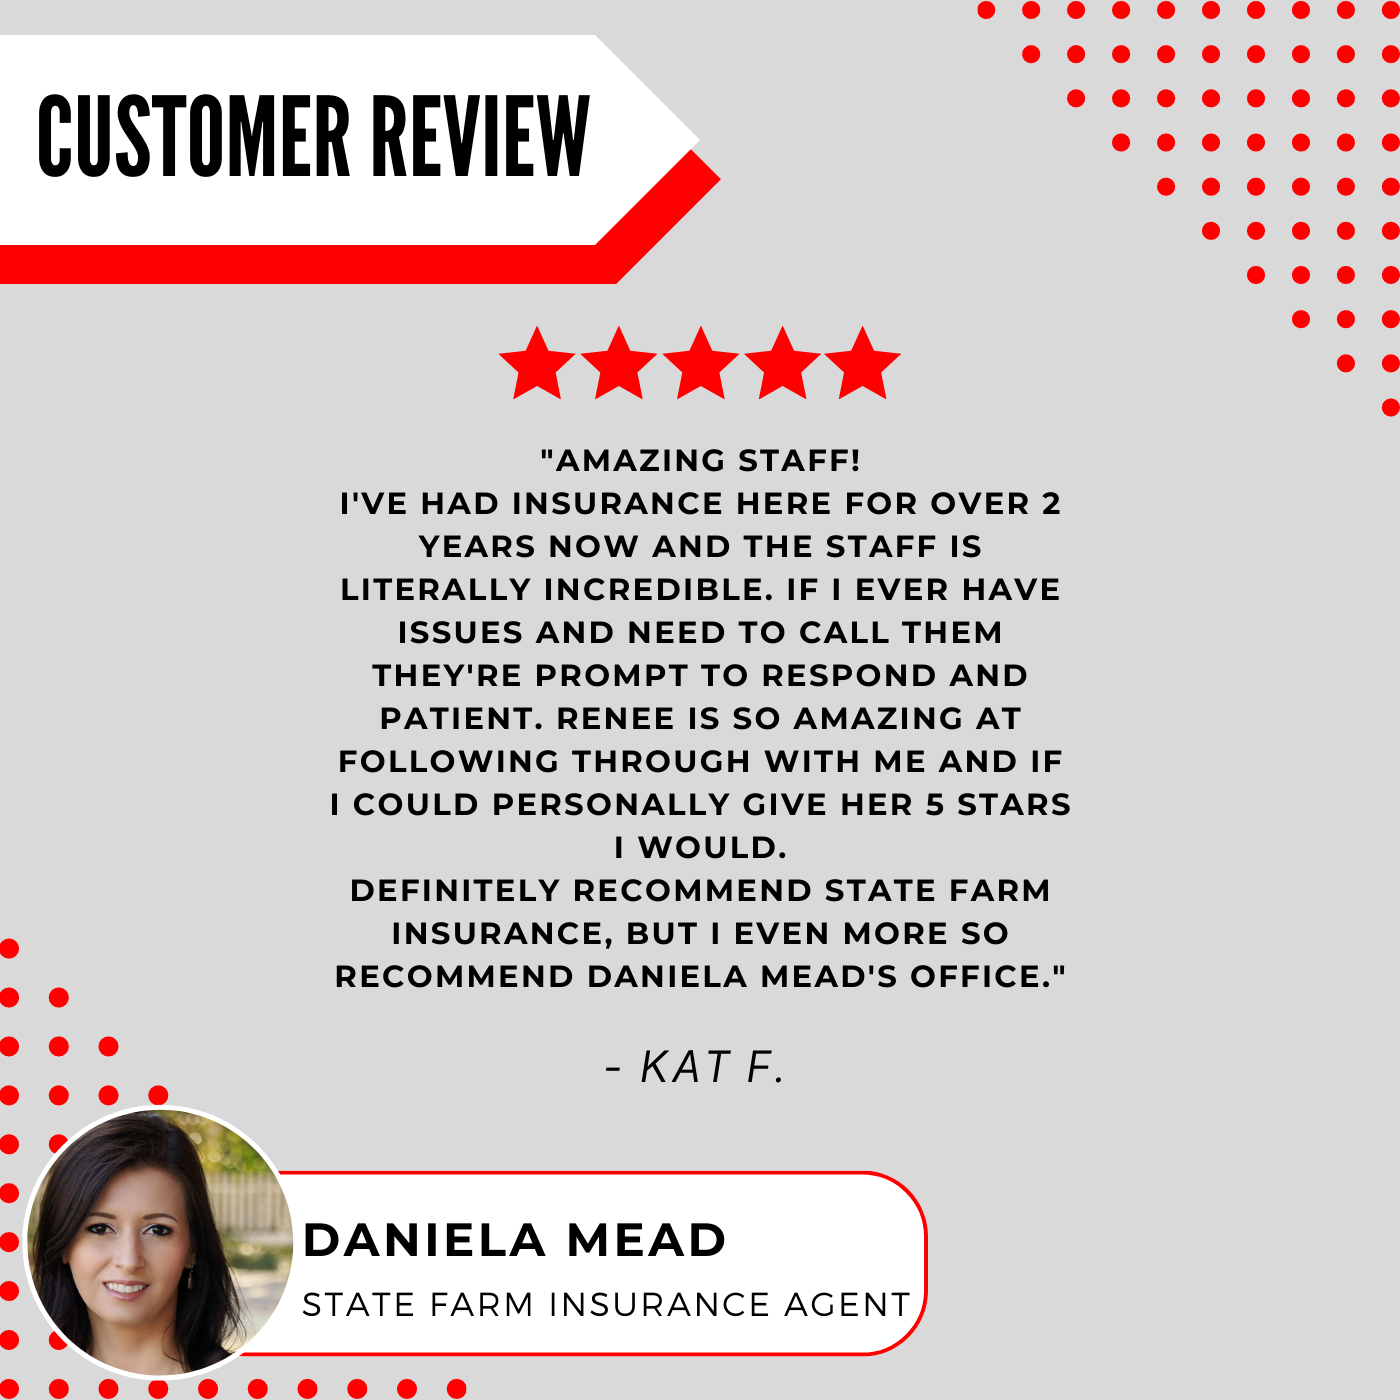 Daniela Mead - State Farm Insurance Agent
Review highlight